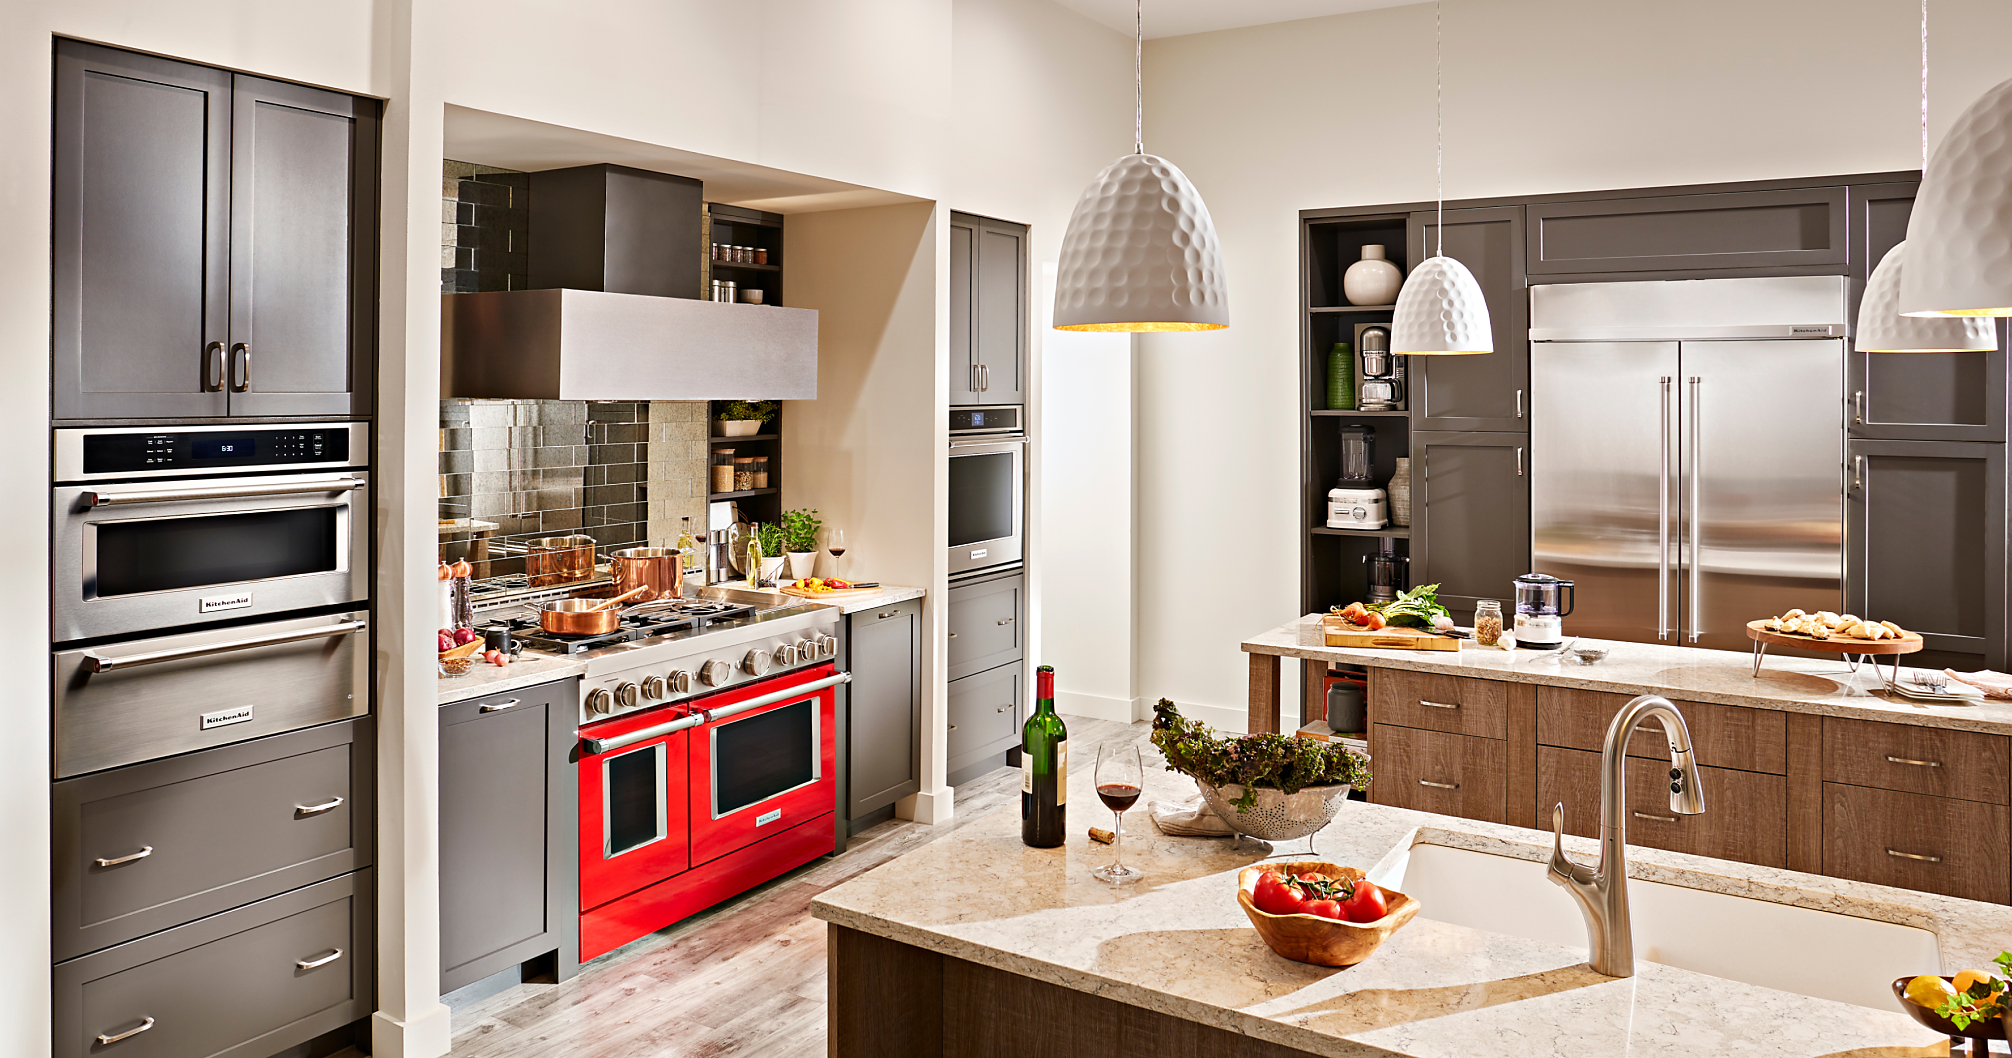 Red commercial style range in gray kitchen